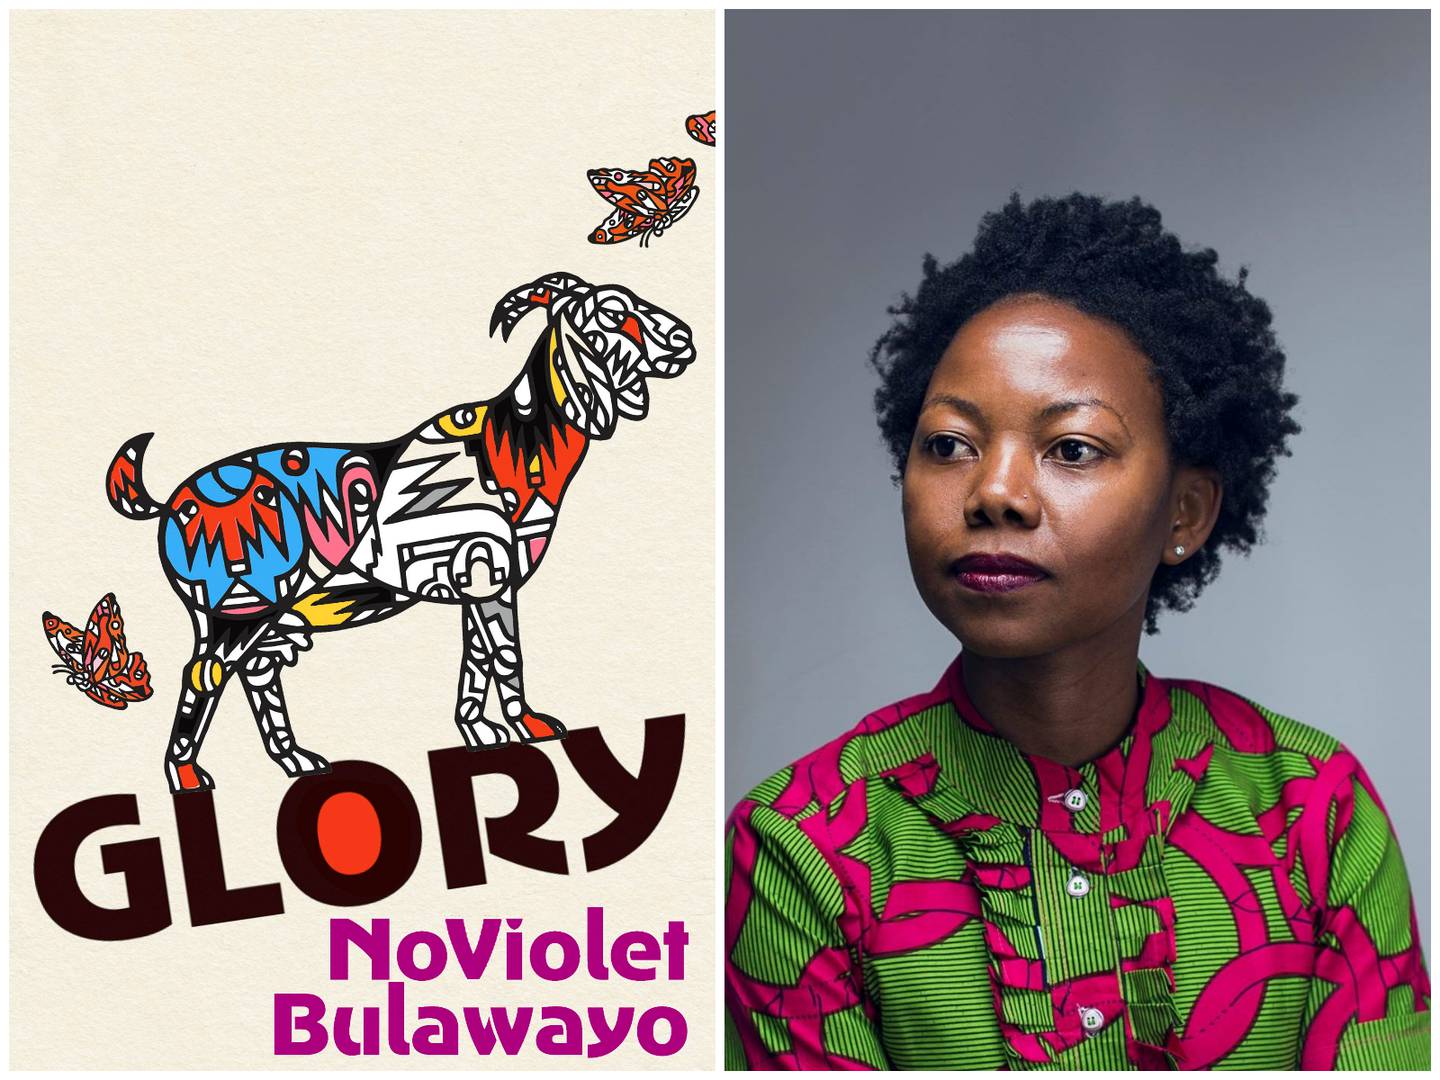 'Glory' by NoViolet Bulawayo uses animal characters to tell a story about violence and power. Photo: Booker Prize